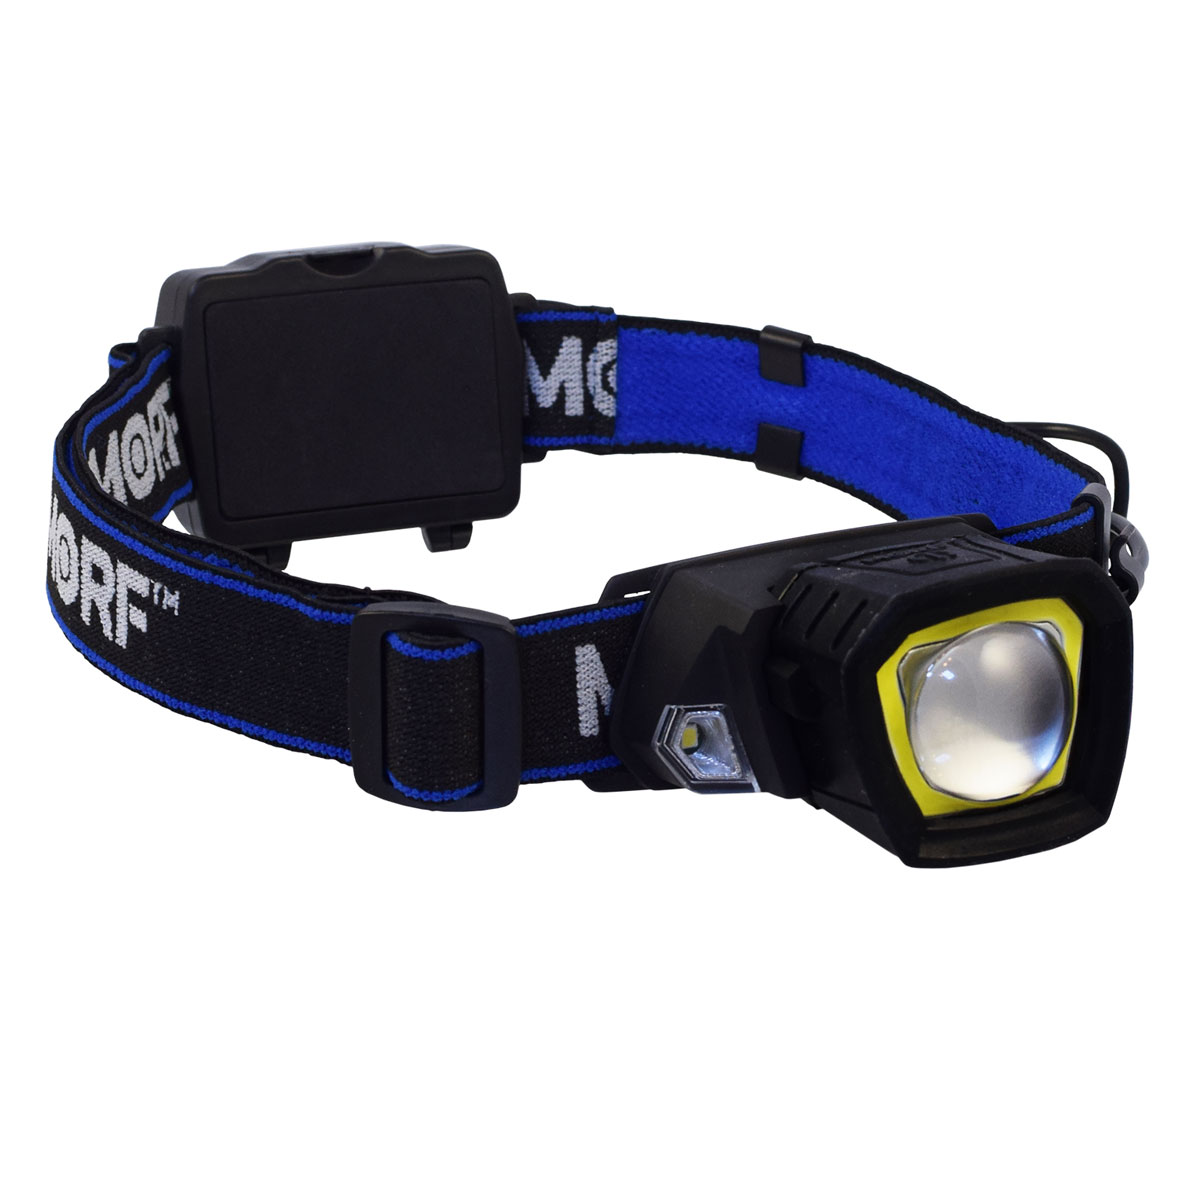 POLICE SECURITY MORF 3-IN-1 RUGGED 230 LUMEN HEADLAMP + MAGNETIC FLASHLIGHT main photo.